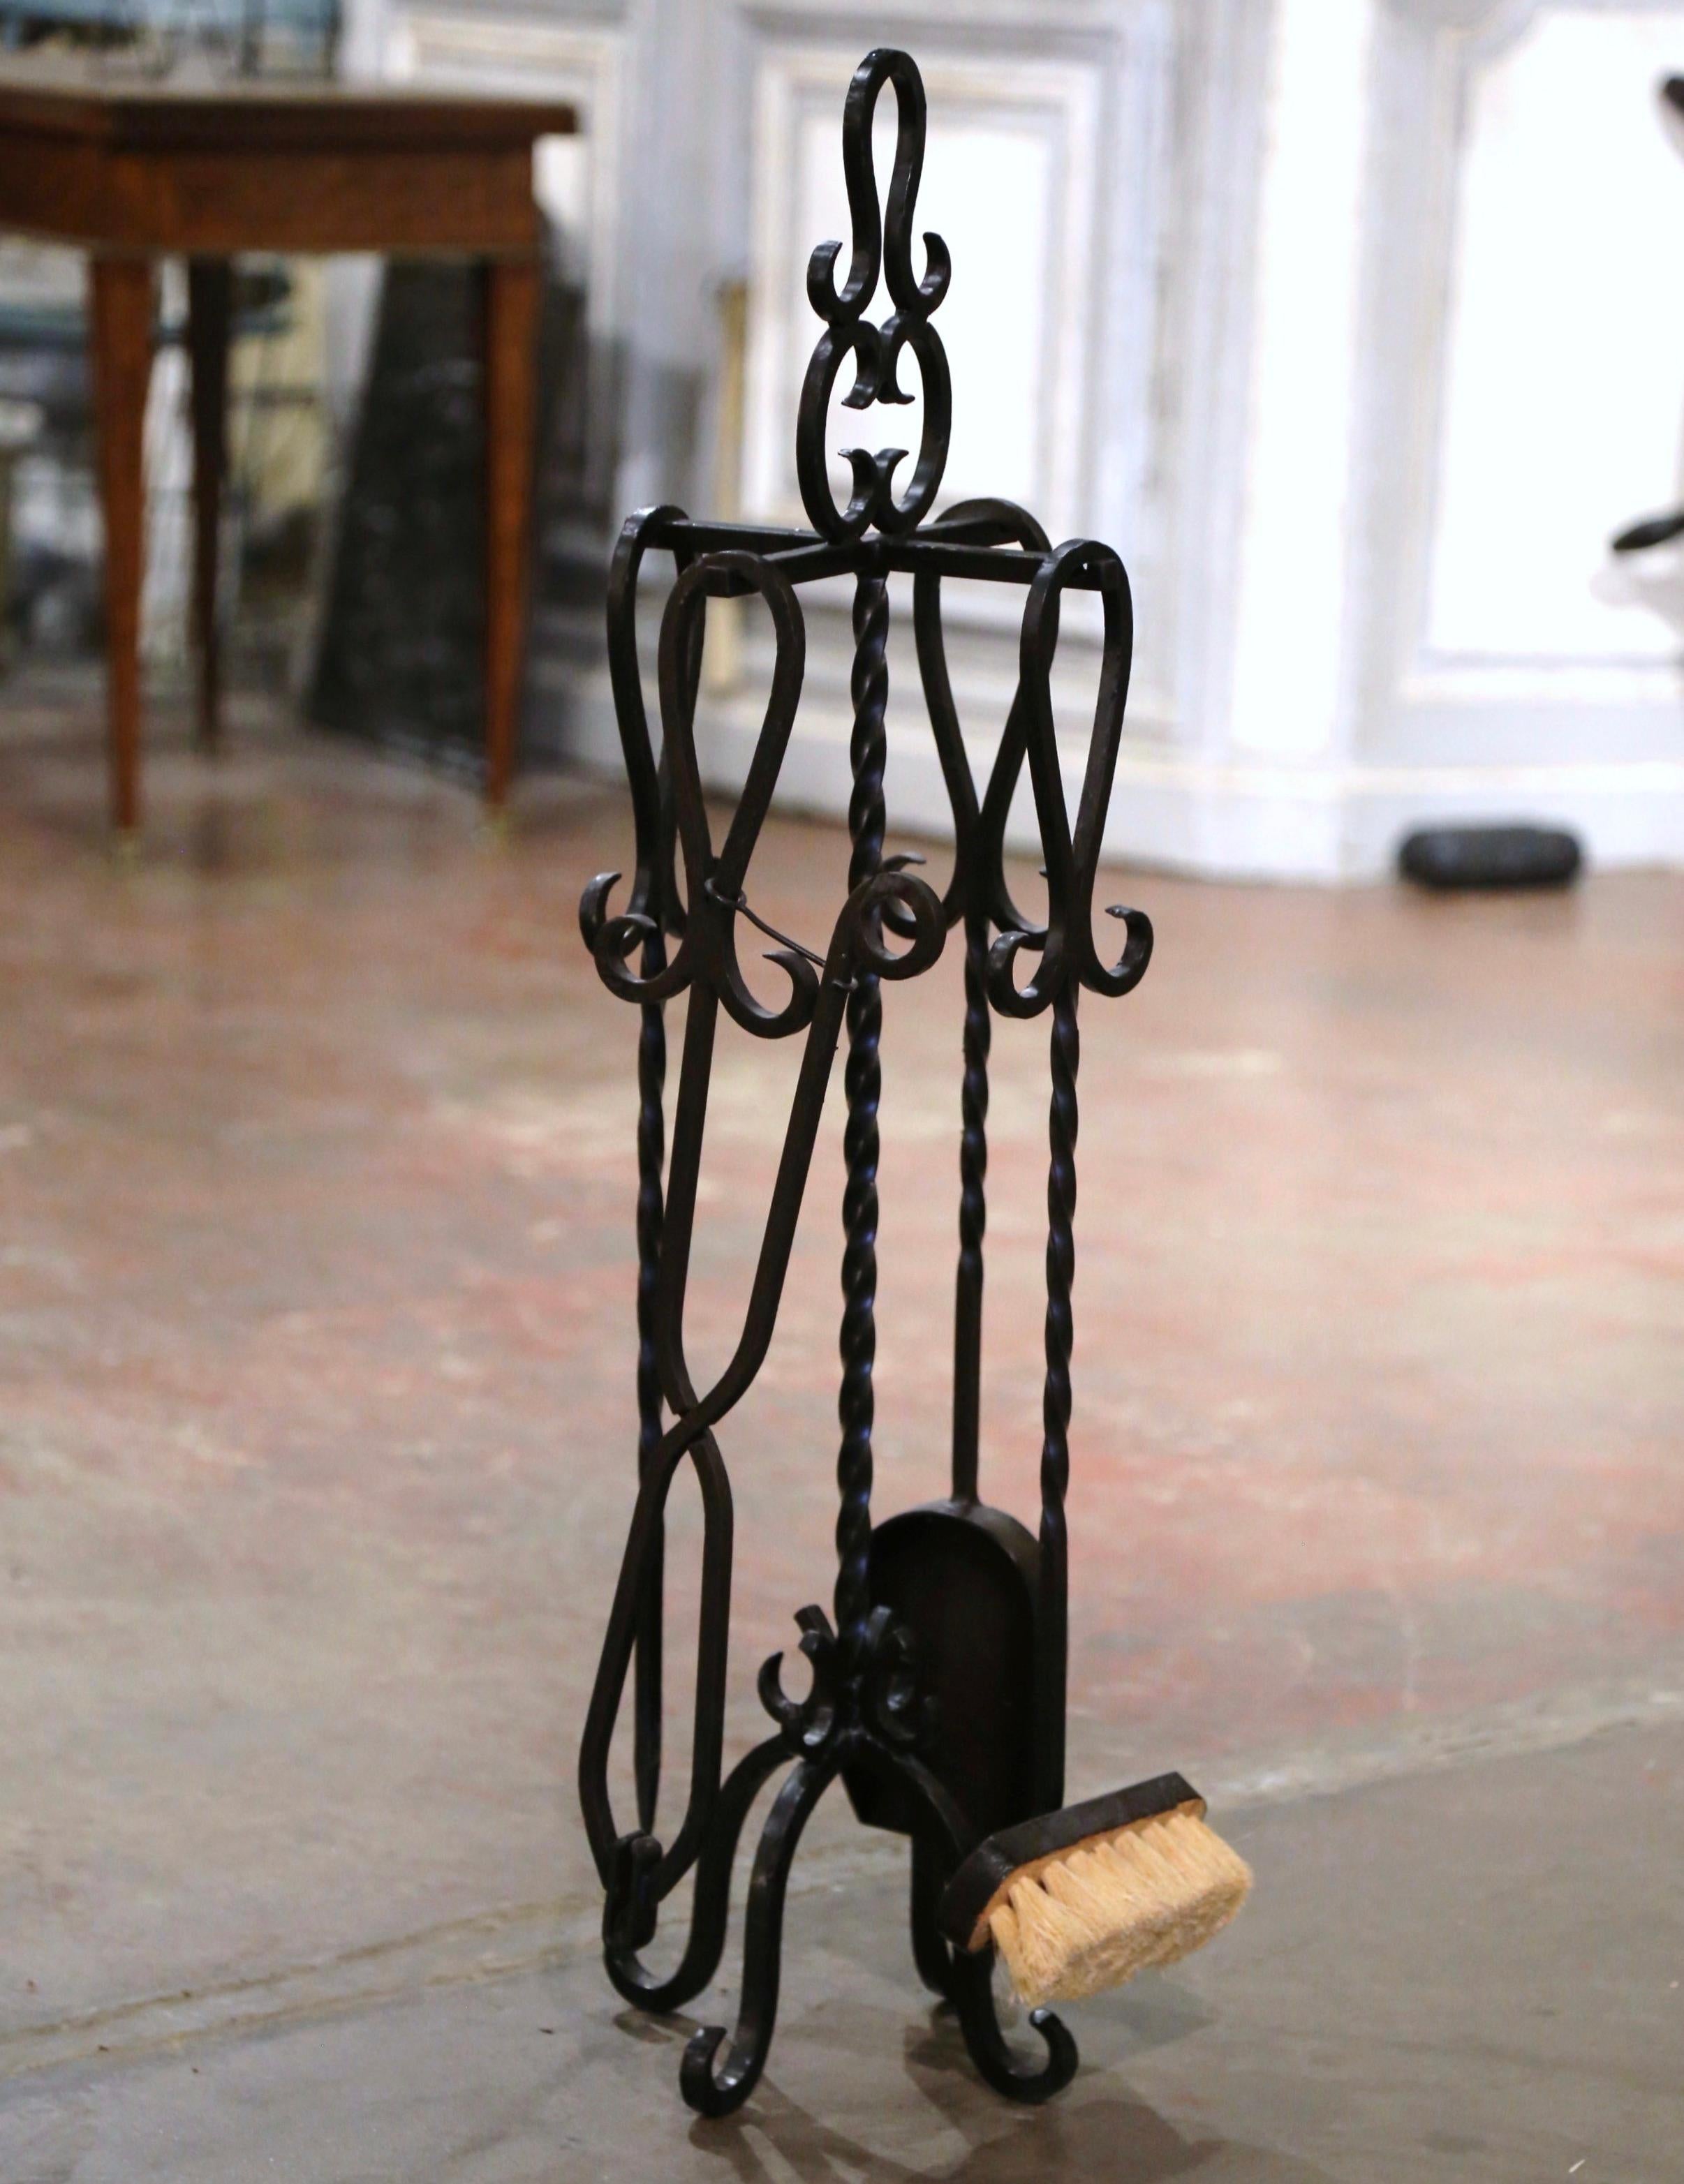 Place this elegant antique fireplace tool set next to your mantel. Crafted circa 2000, the Gothic style 